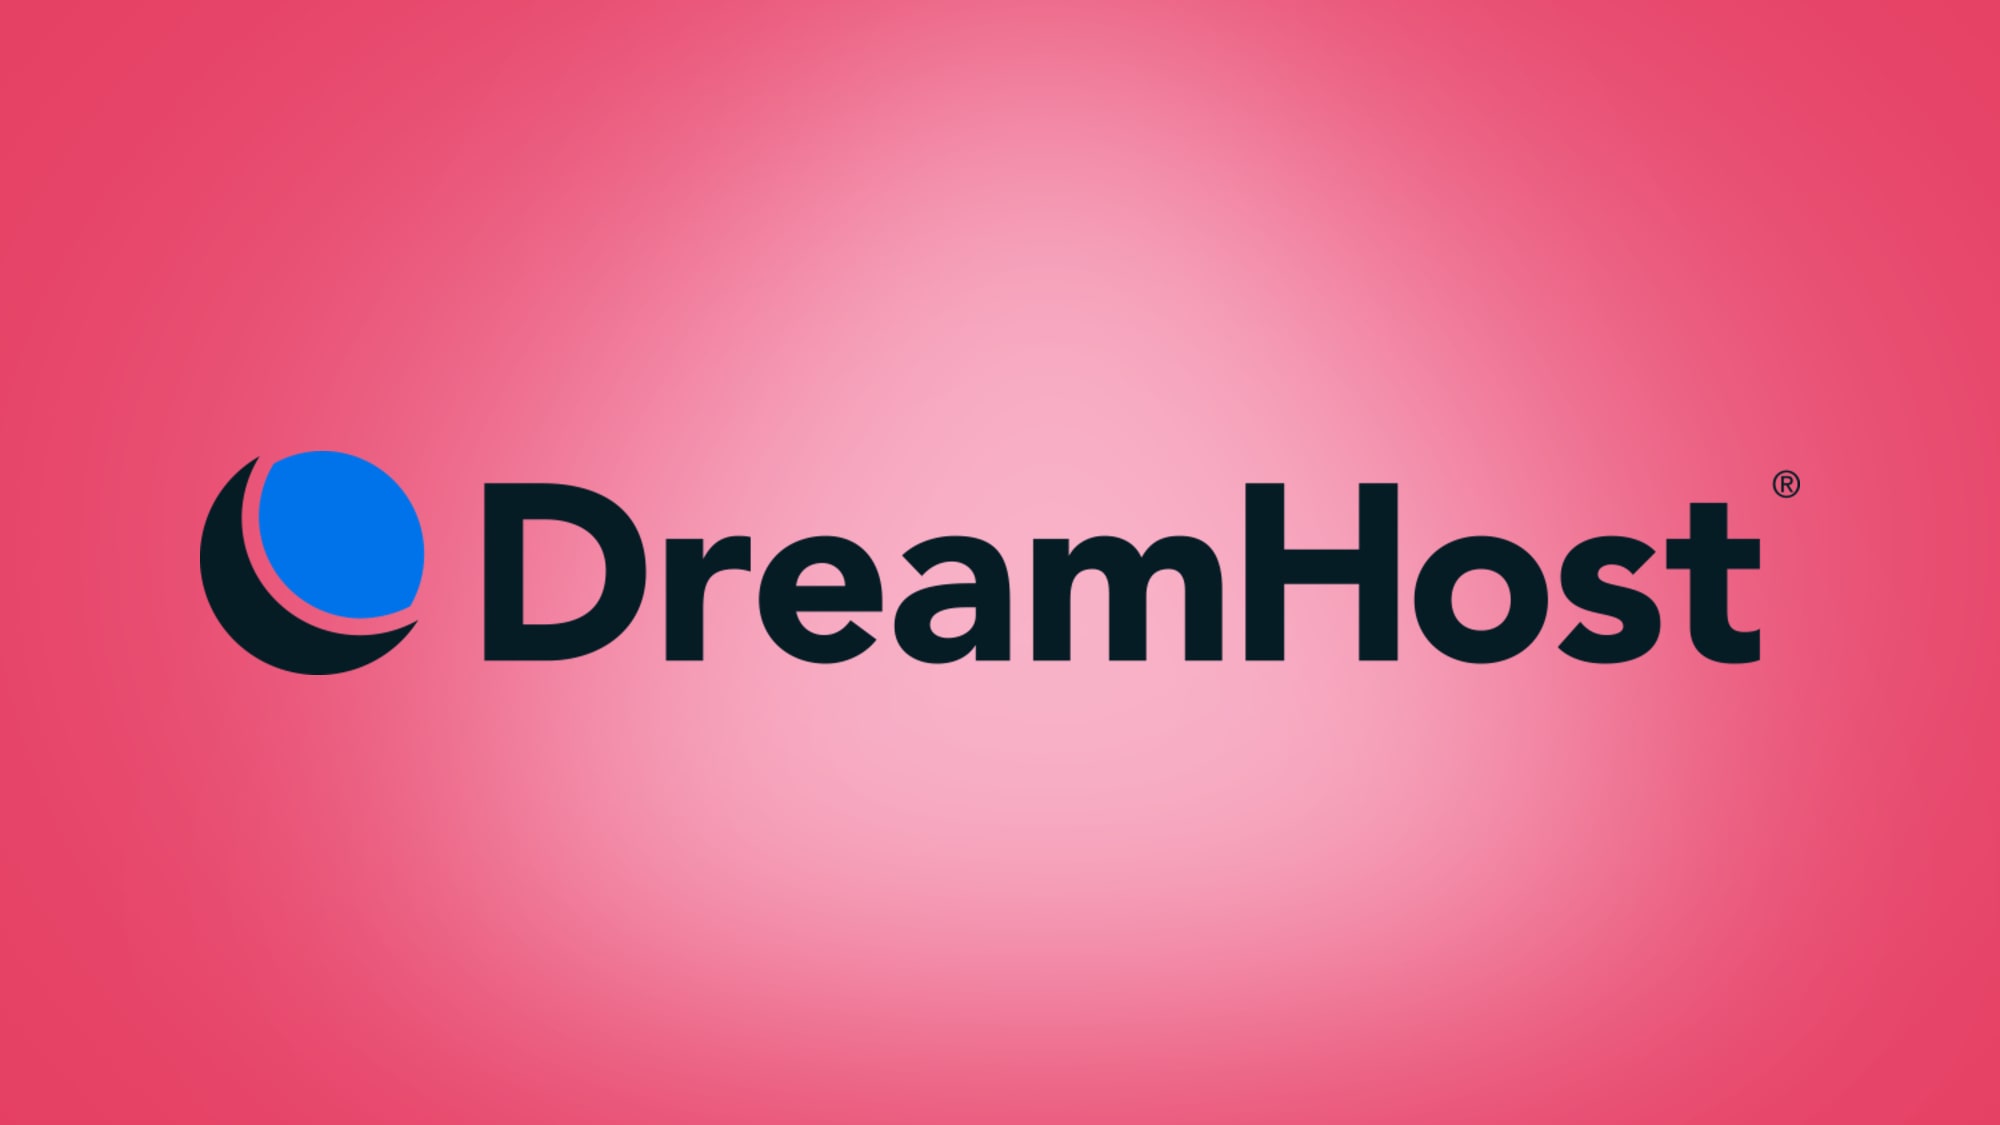 DreamHost logo on pink background